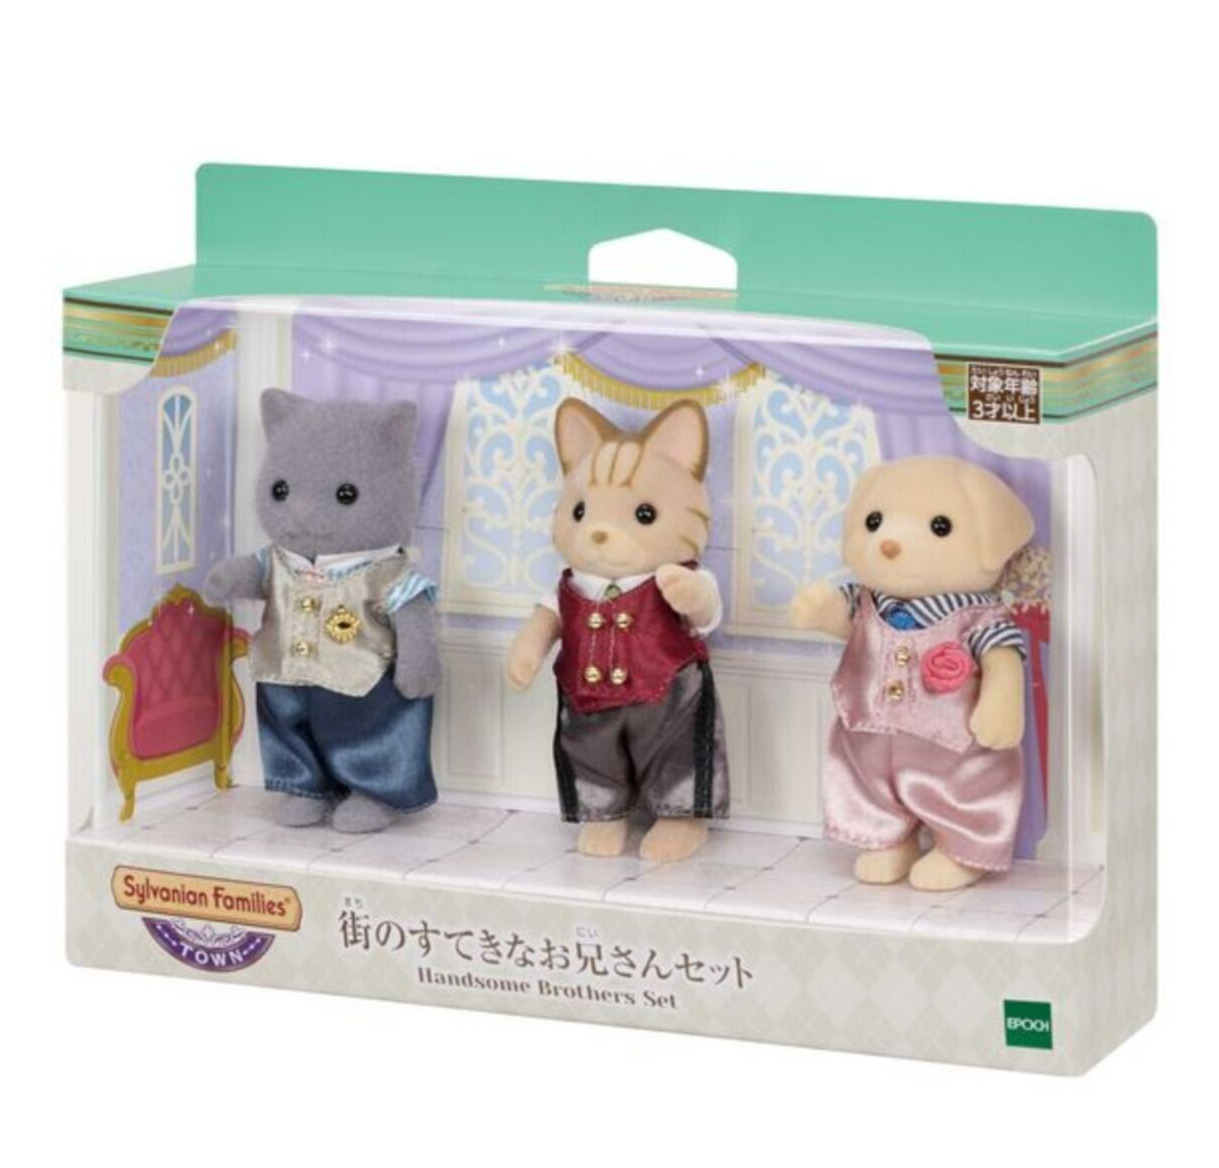 Sylvanian Families Doll Nice big brother set in town Calico Critters figure toy